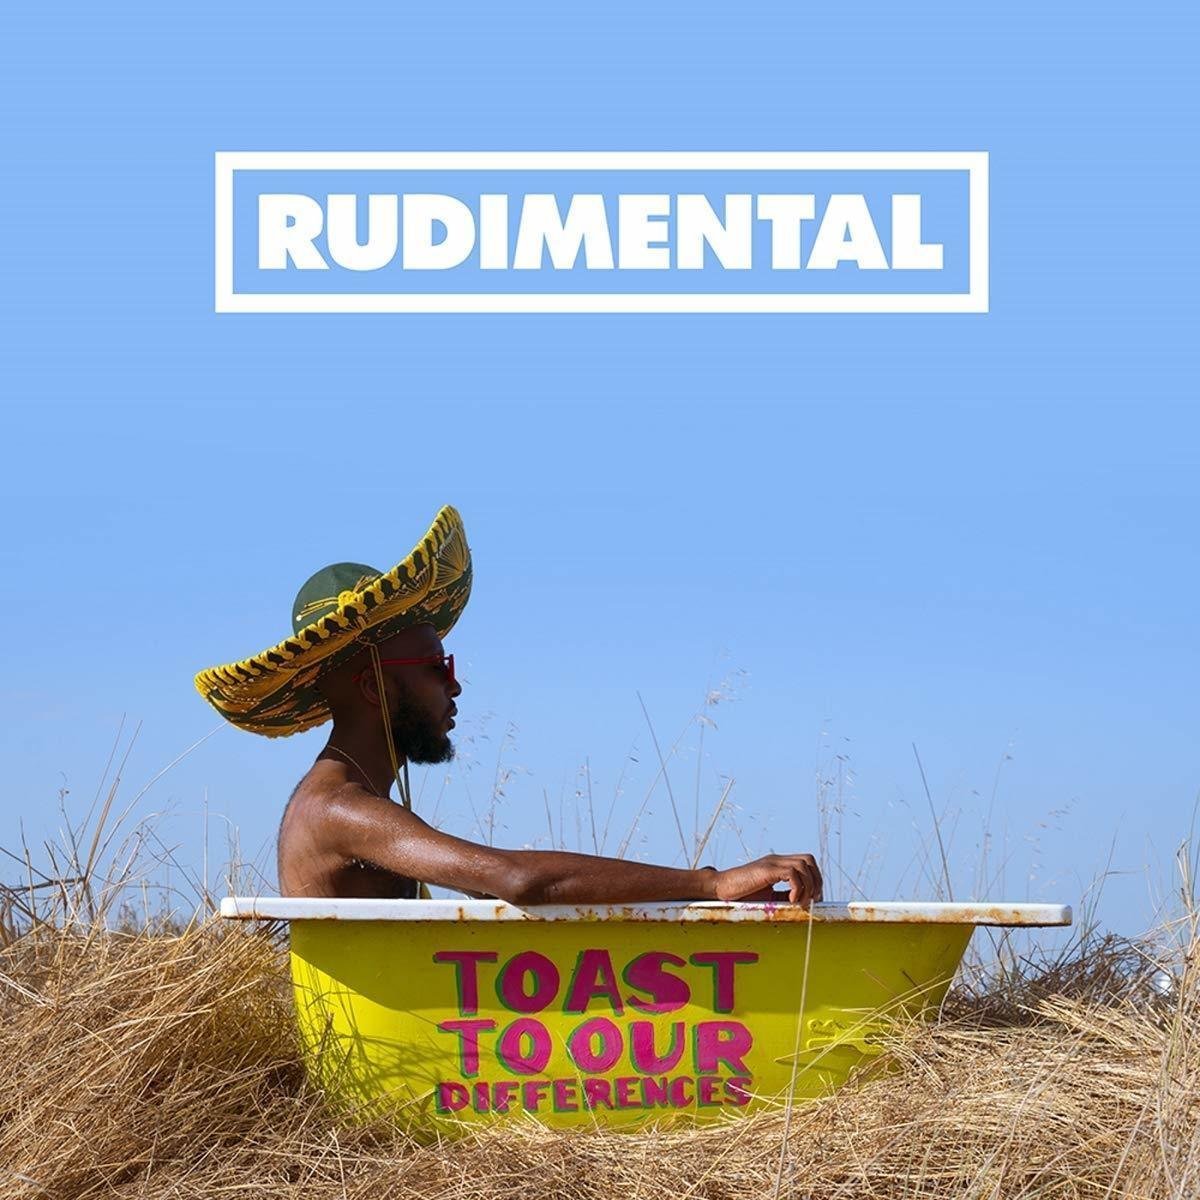 Disque vinyle Rudimental - Toast To Our Differences (LP)